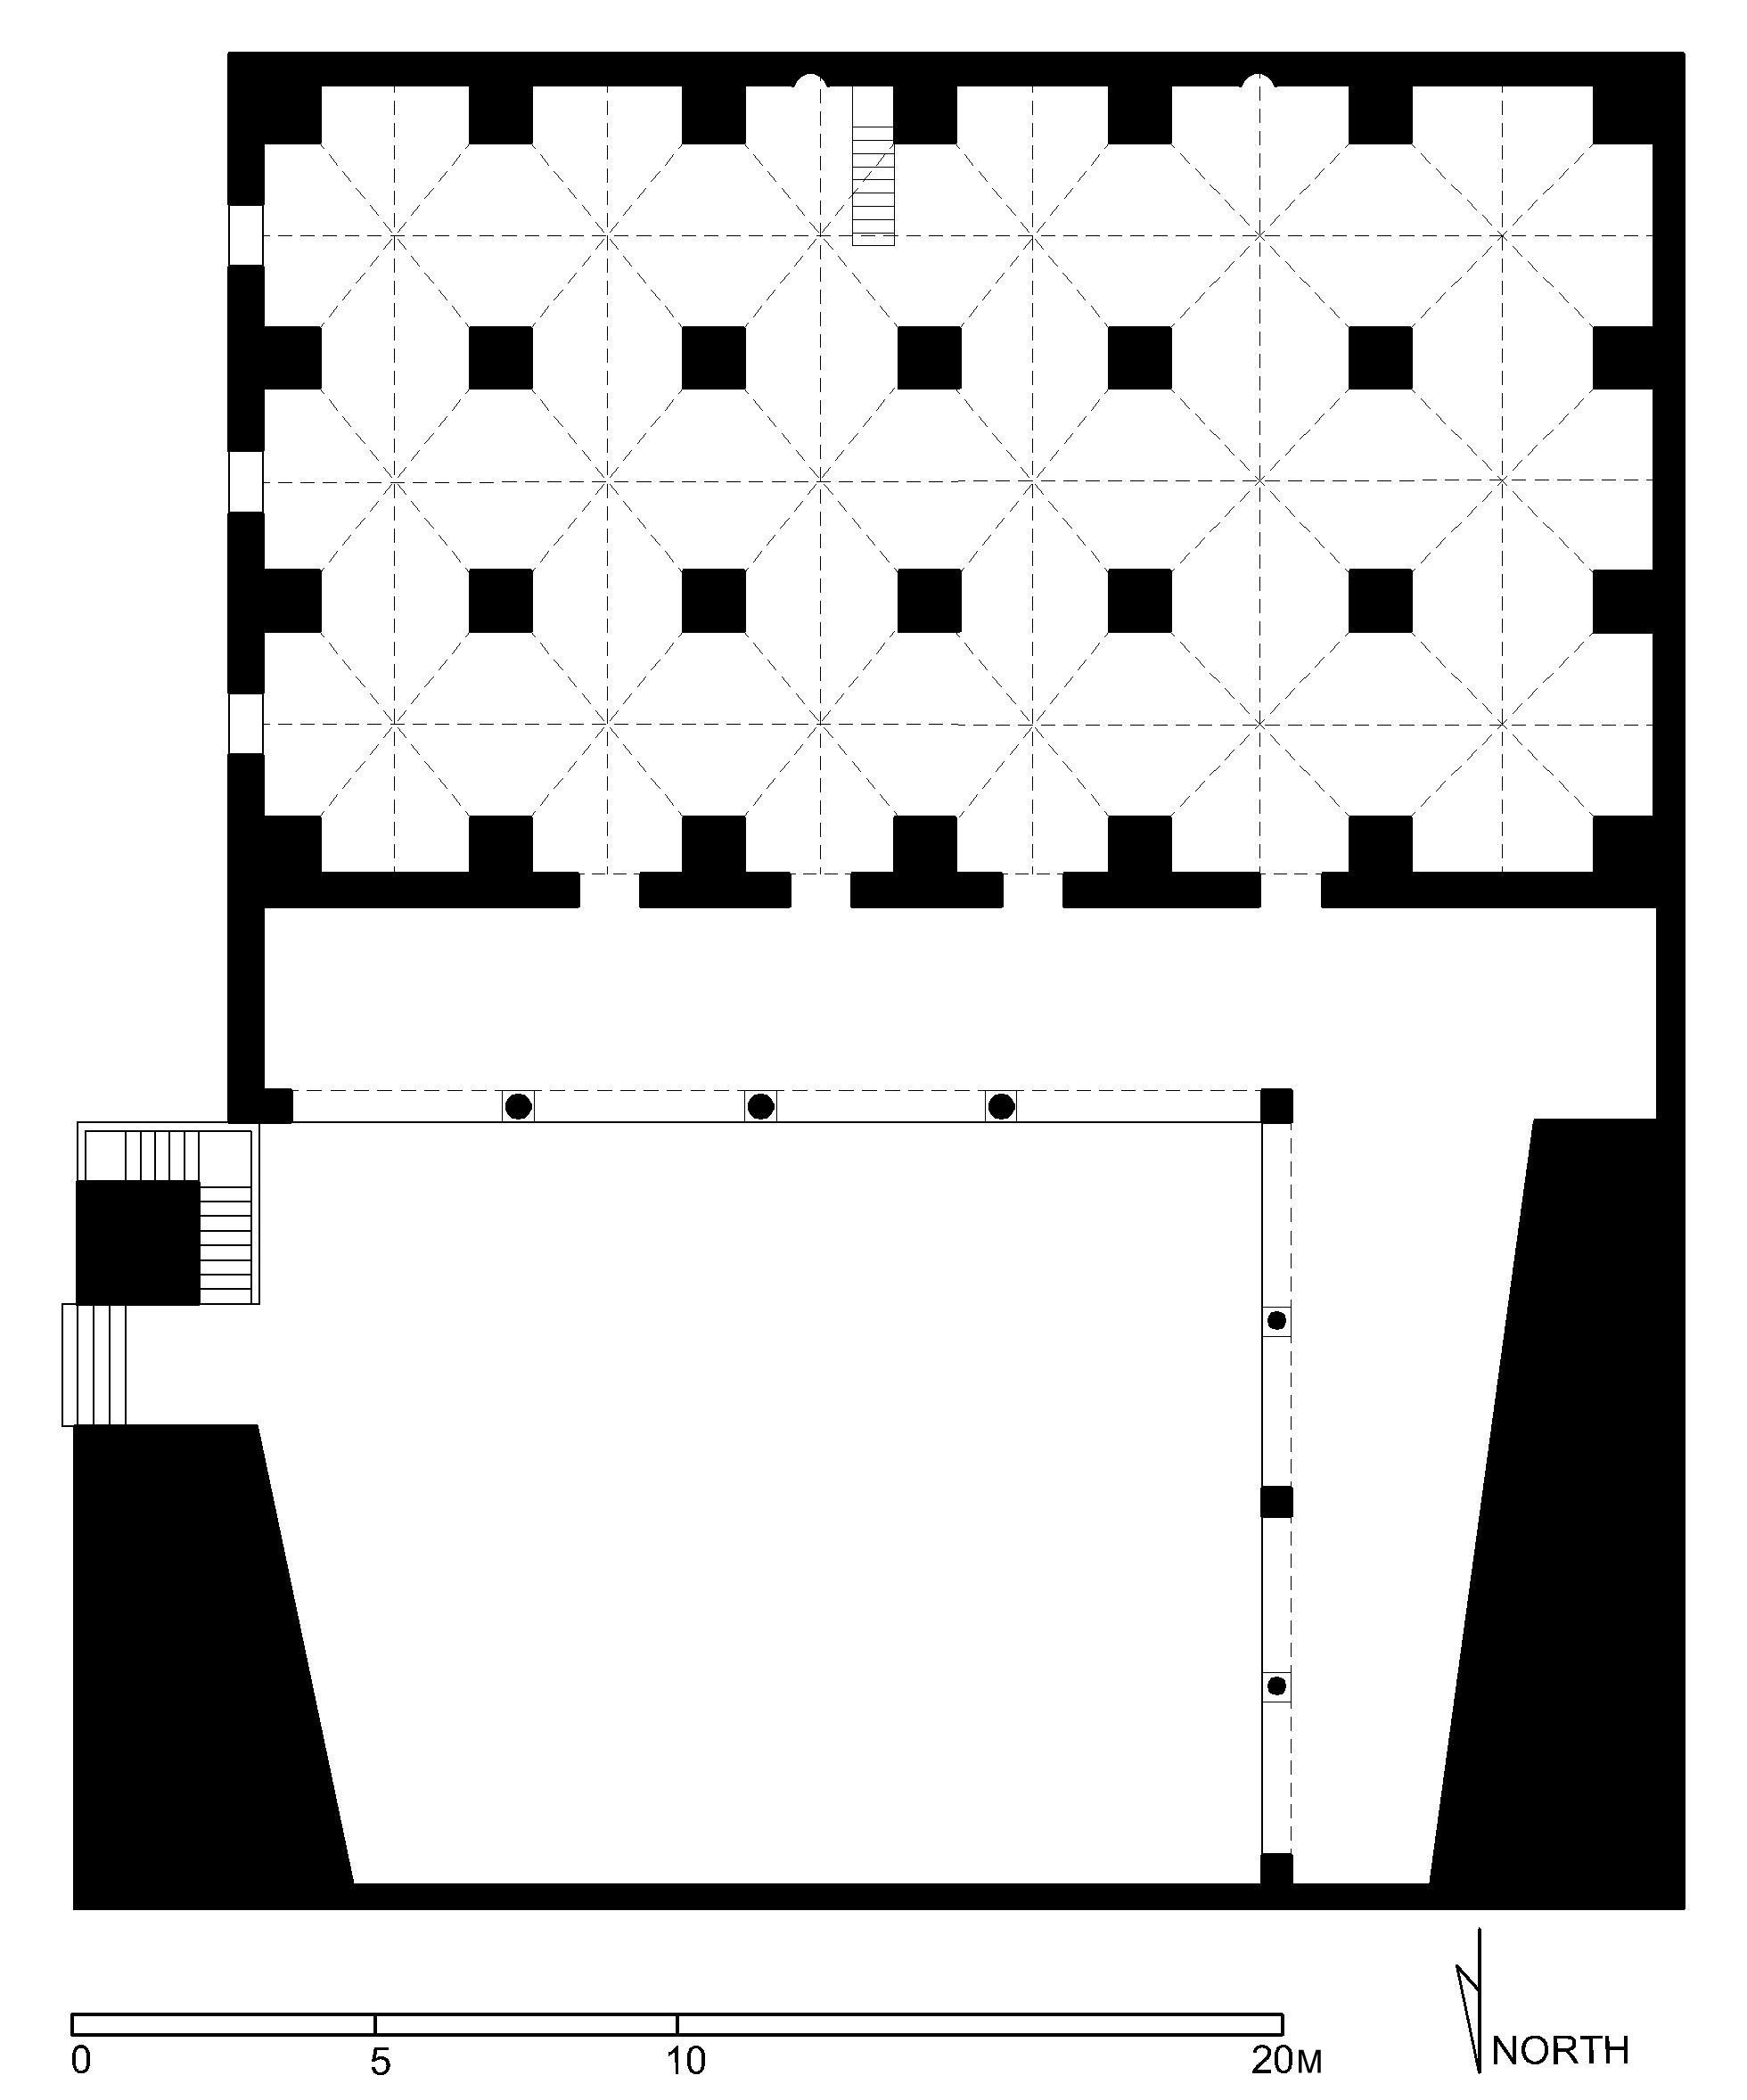 Jami' Tadif al-Kabir - Floor plan of mosque (after Meinecke) in AutoCAD 2000 format. Click the download button to download a zipped file containing the .dwg file. 